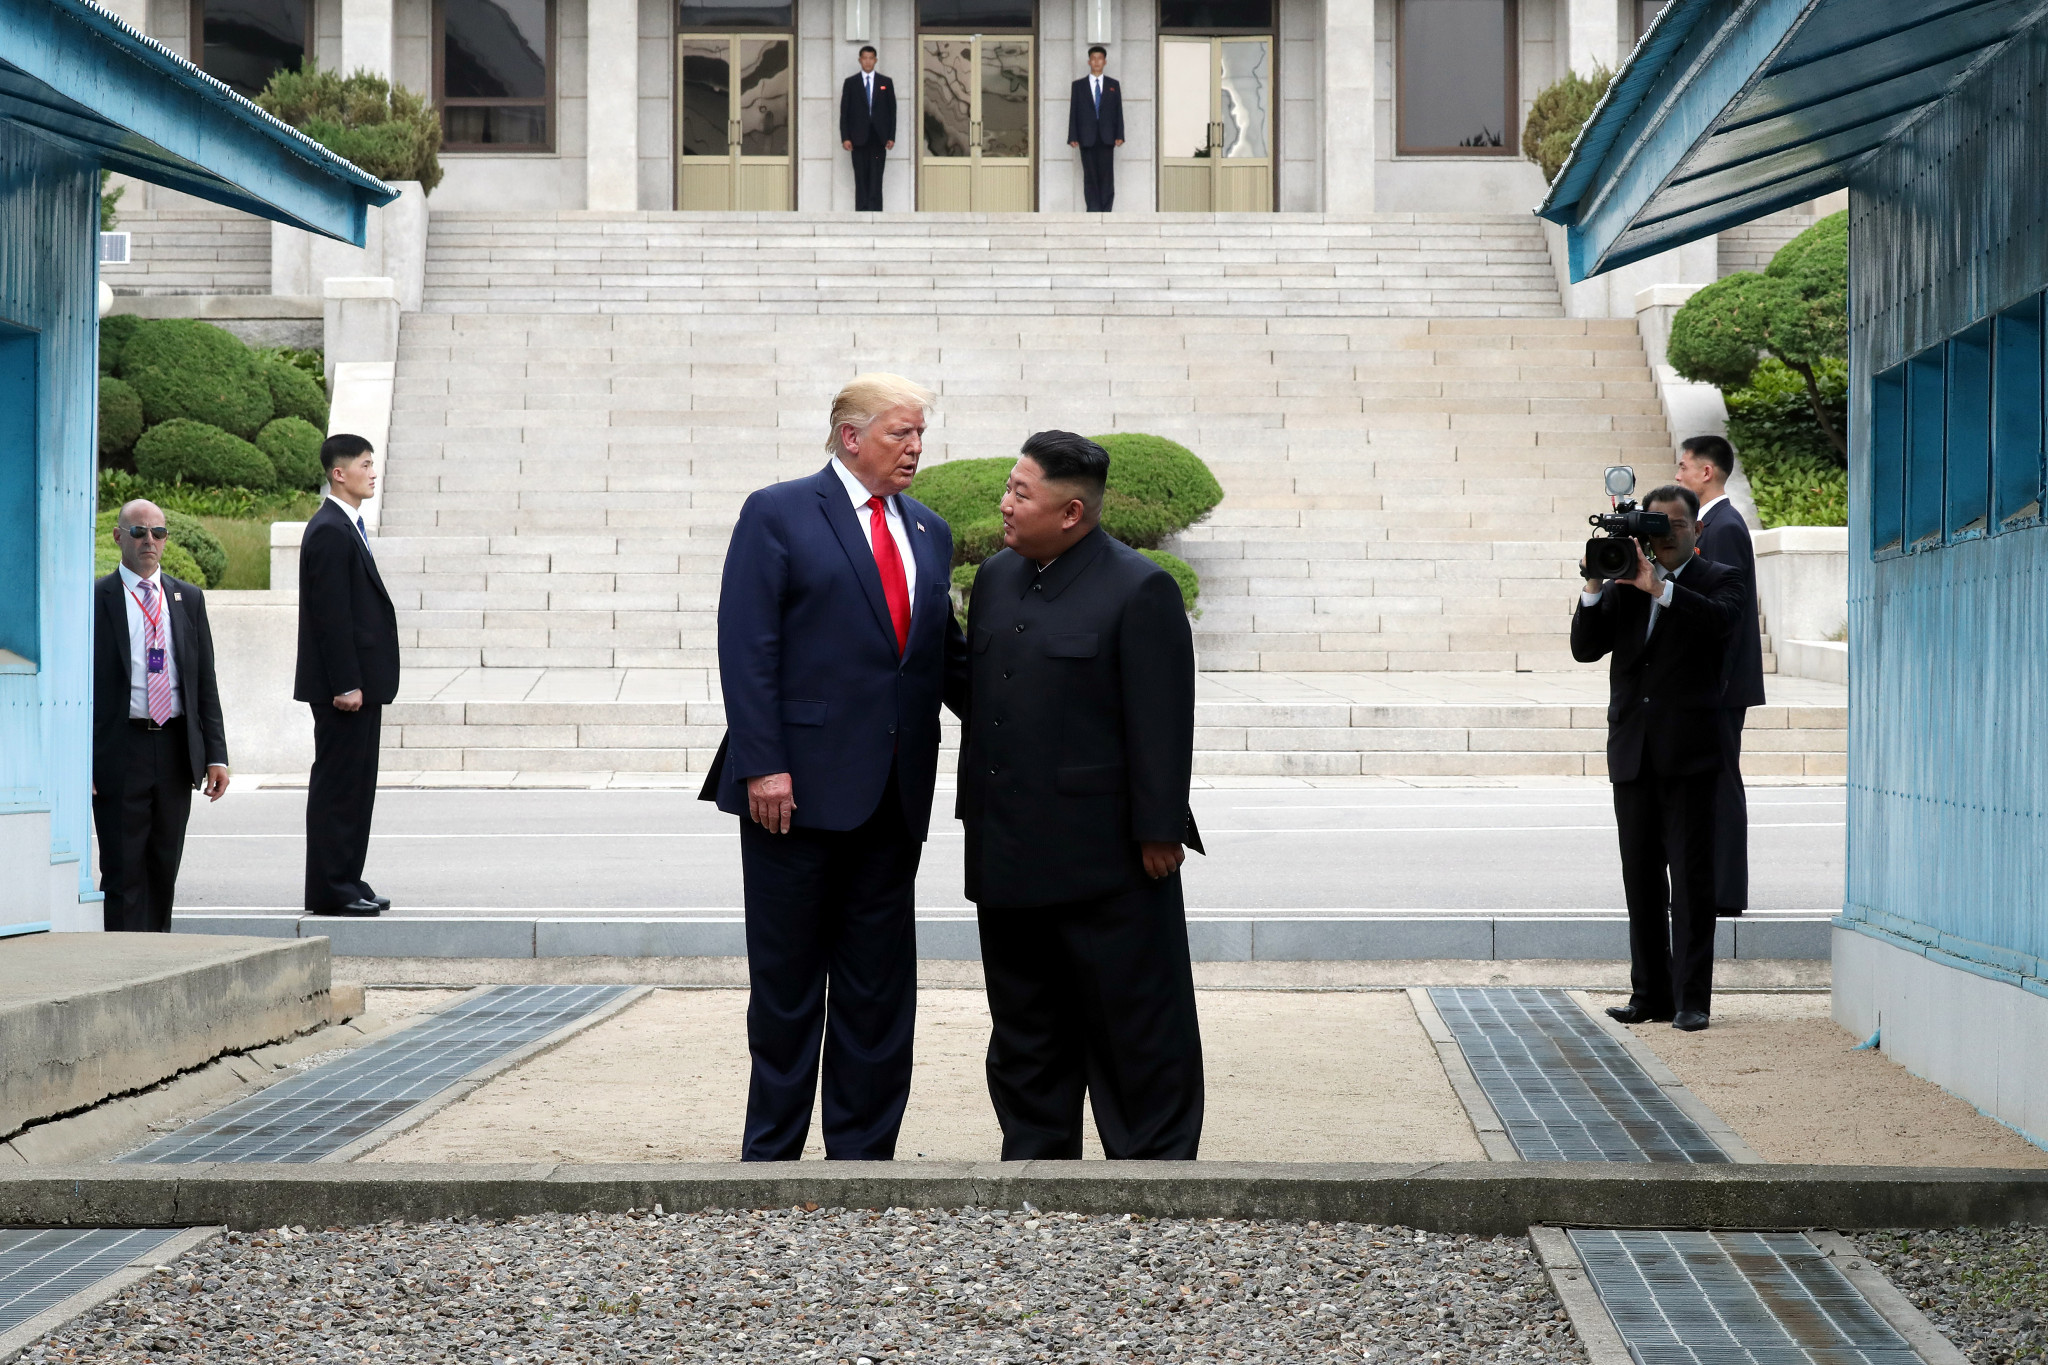 Donald Trump became the first United States President to step foot into North Korea after meeting the country's Leader Kim Jong Un in the Korean Demilitarized Zone ©Getty Images